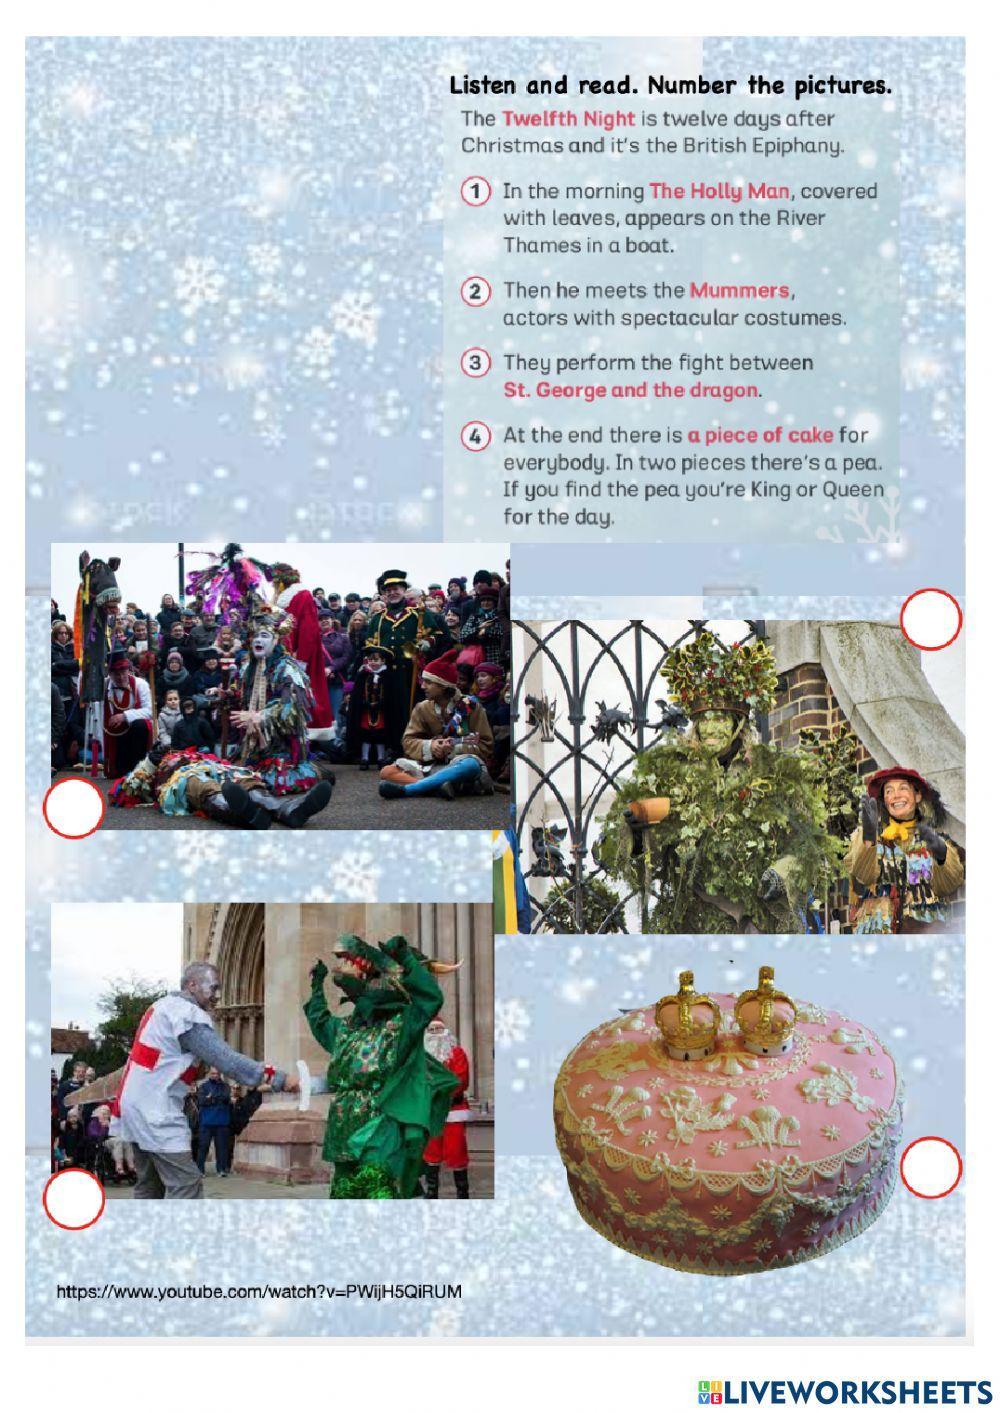 Christmas traditions in London